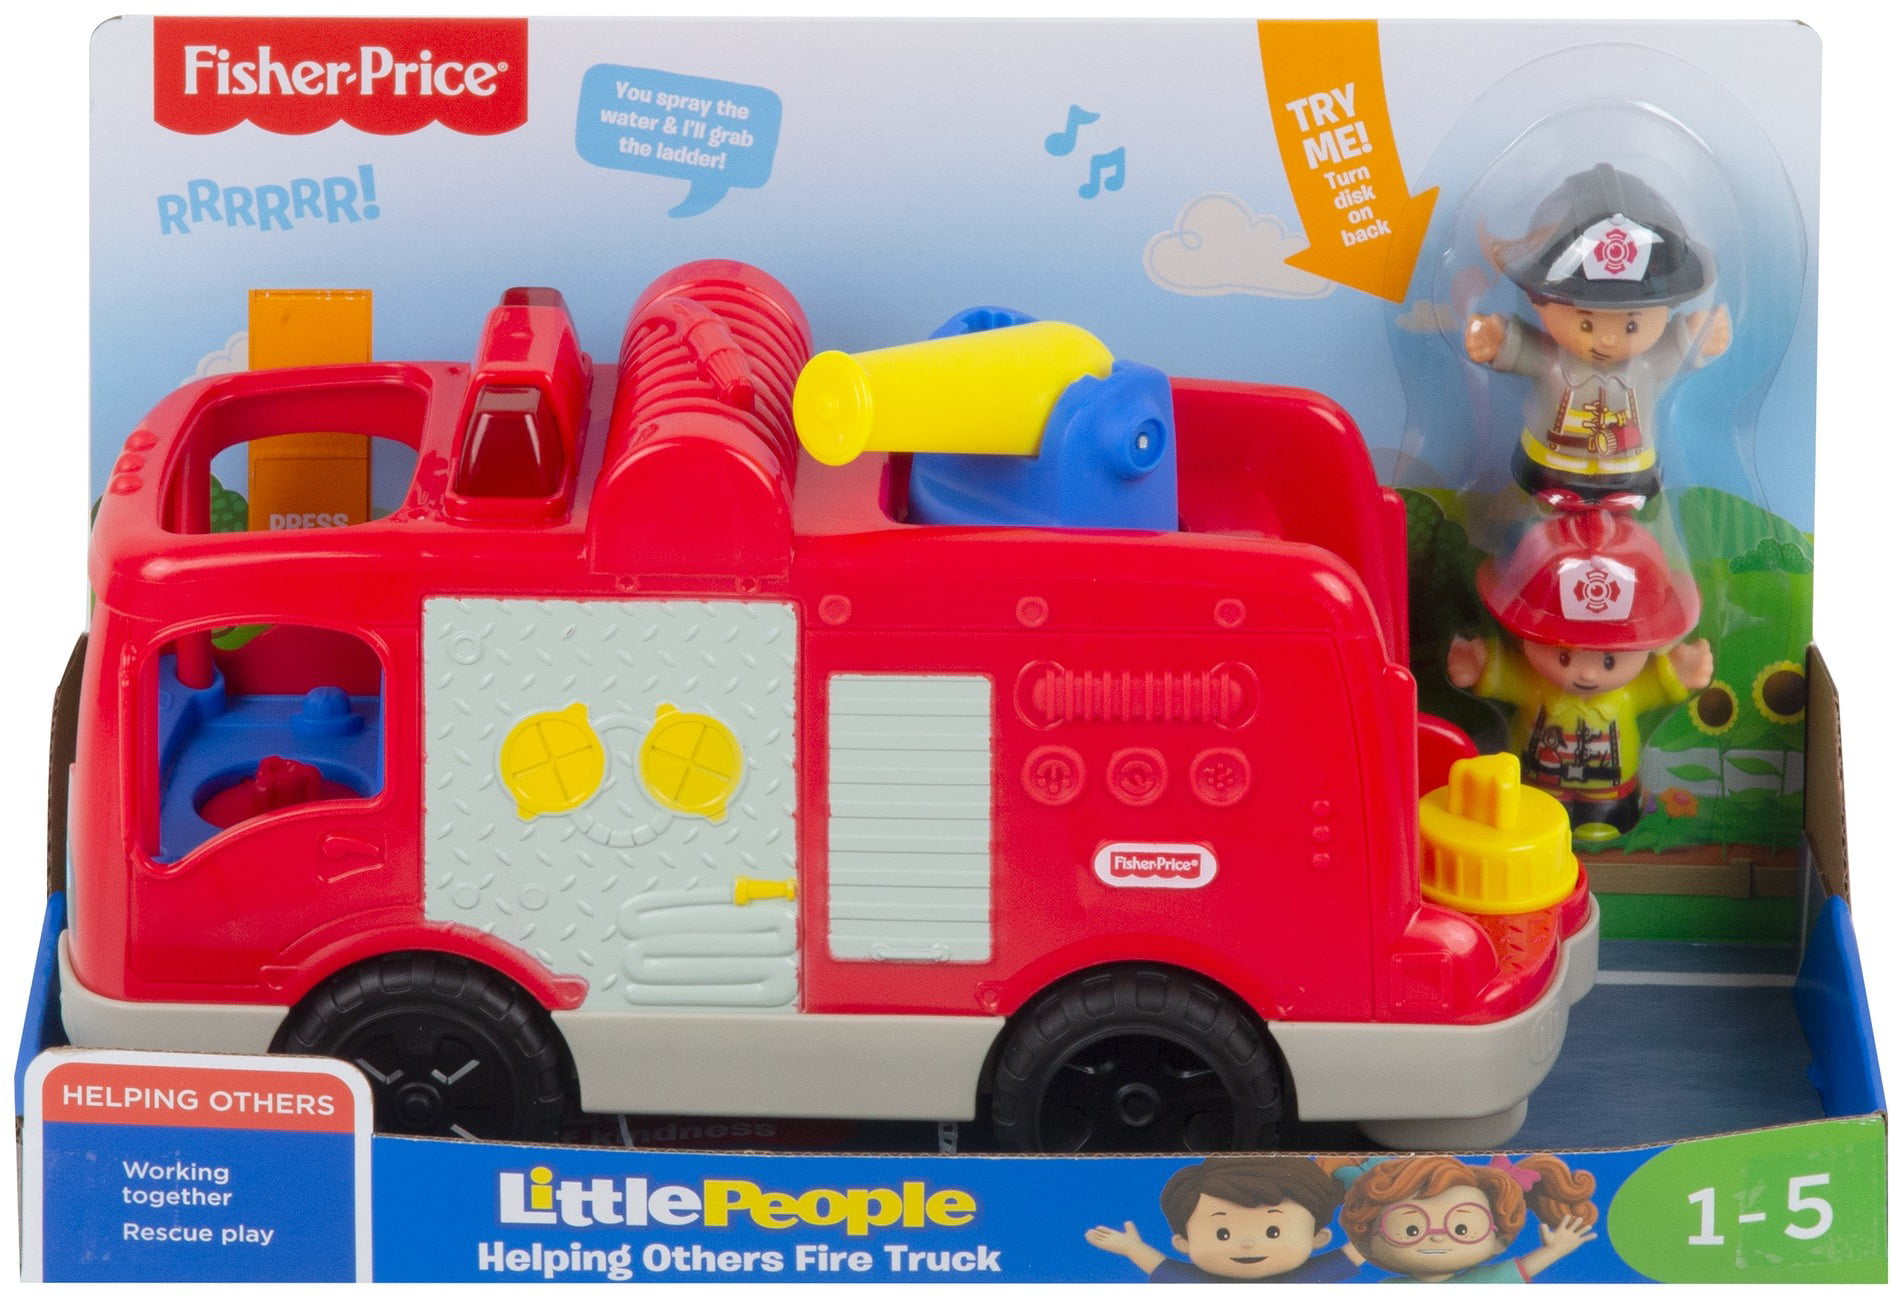 Fisher Price Little People FIREMAN FIREFIGHTER for Fire Truck CHIEF Rescue Cat 